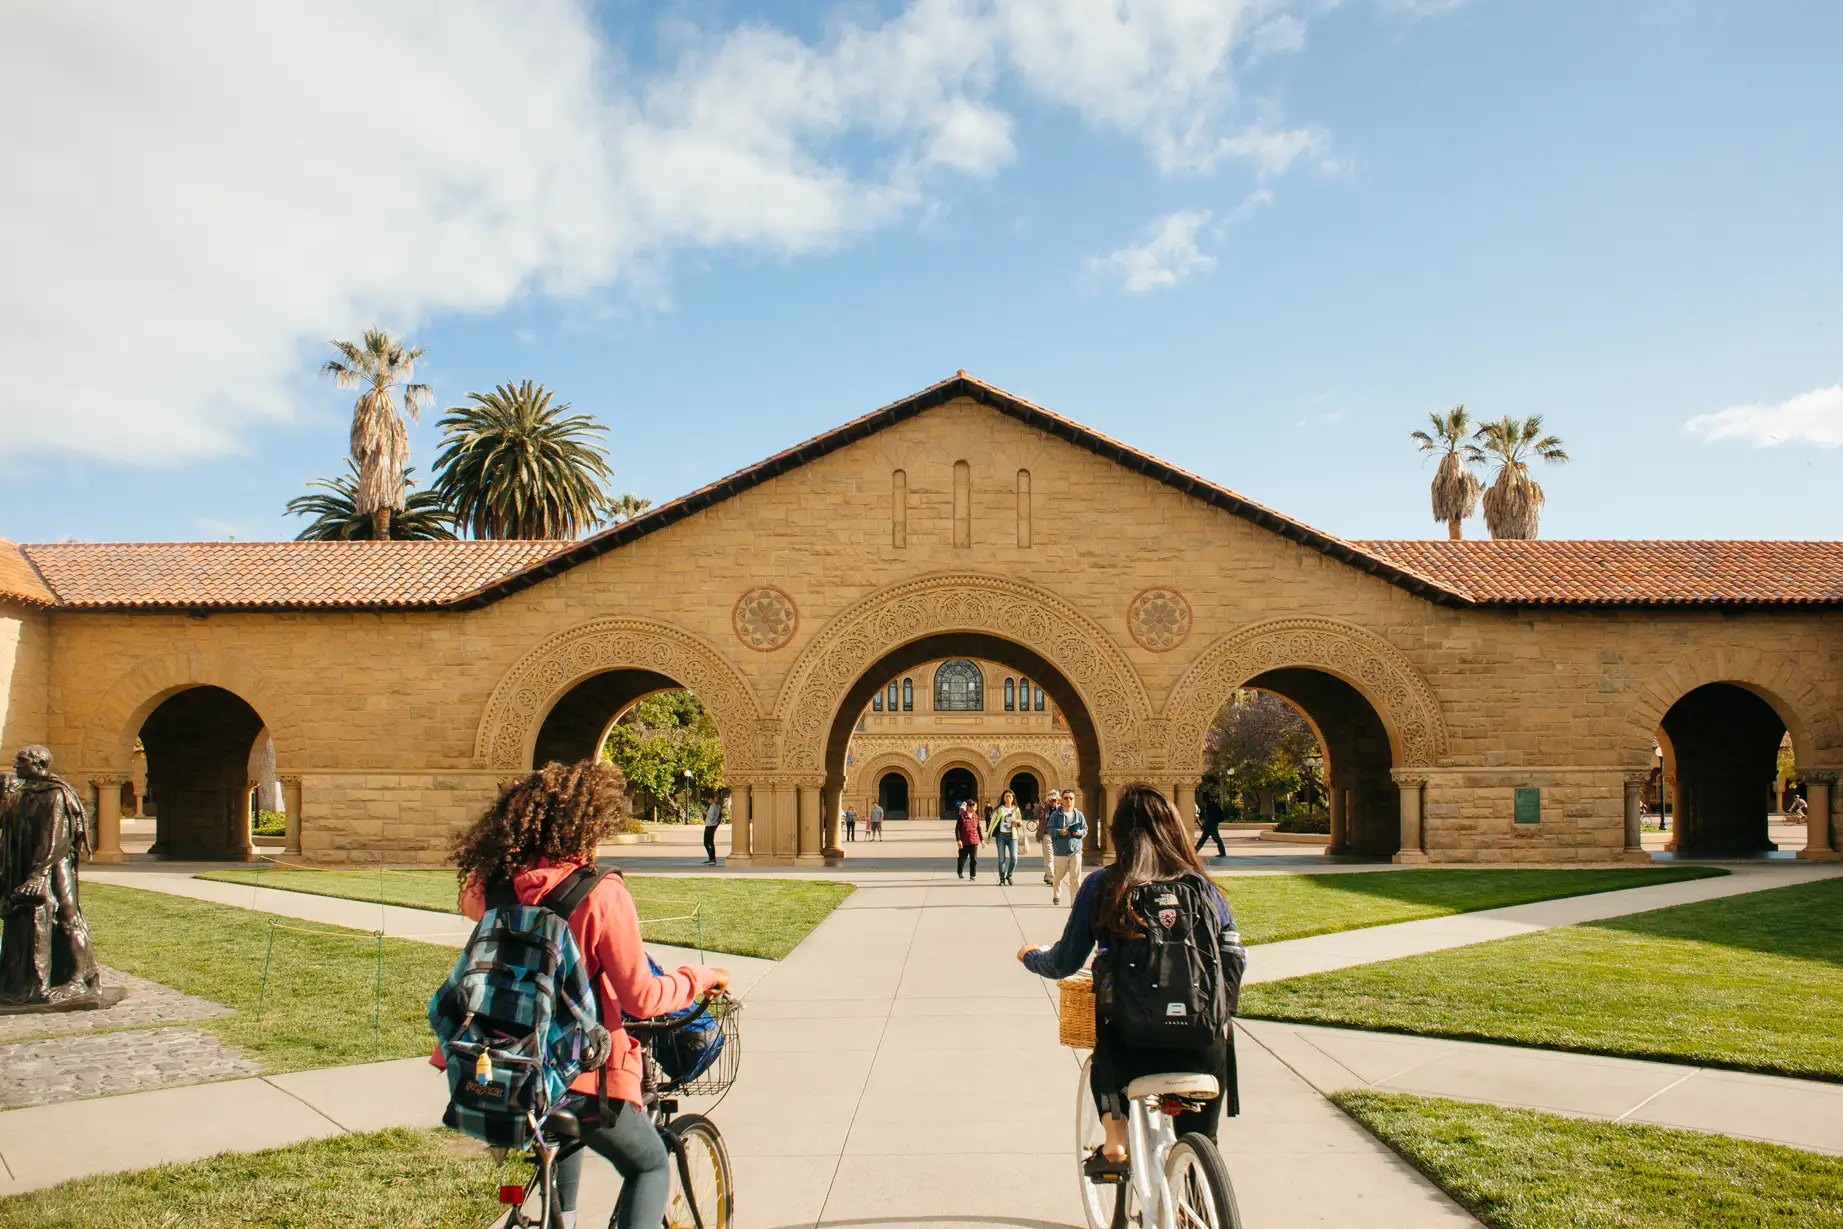 Students at the Stanford University campus